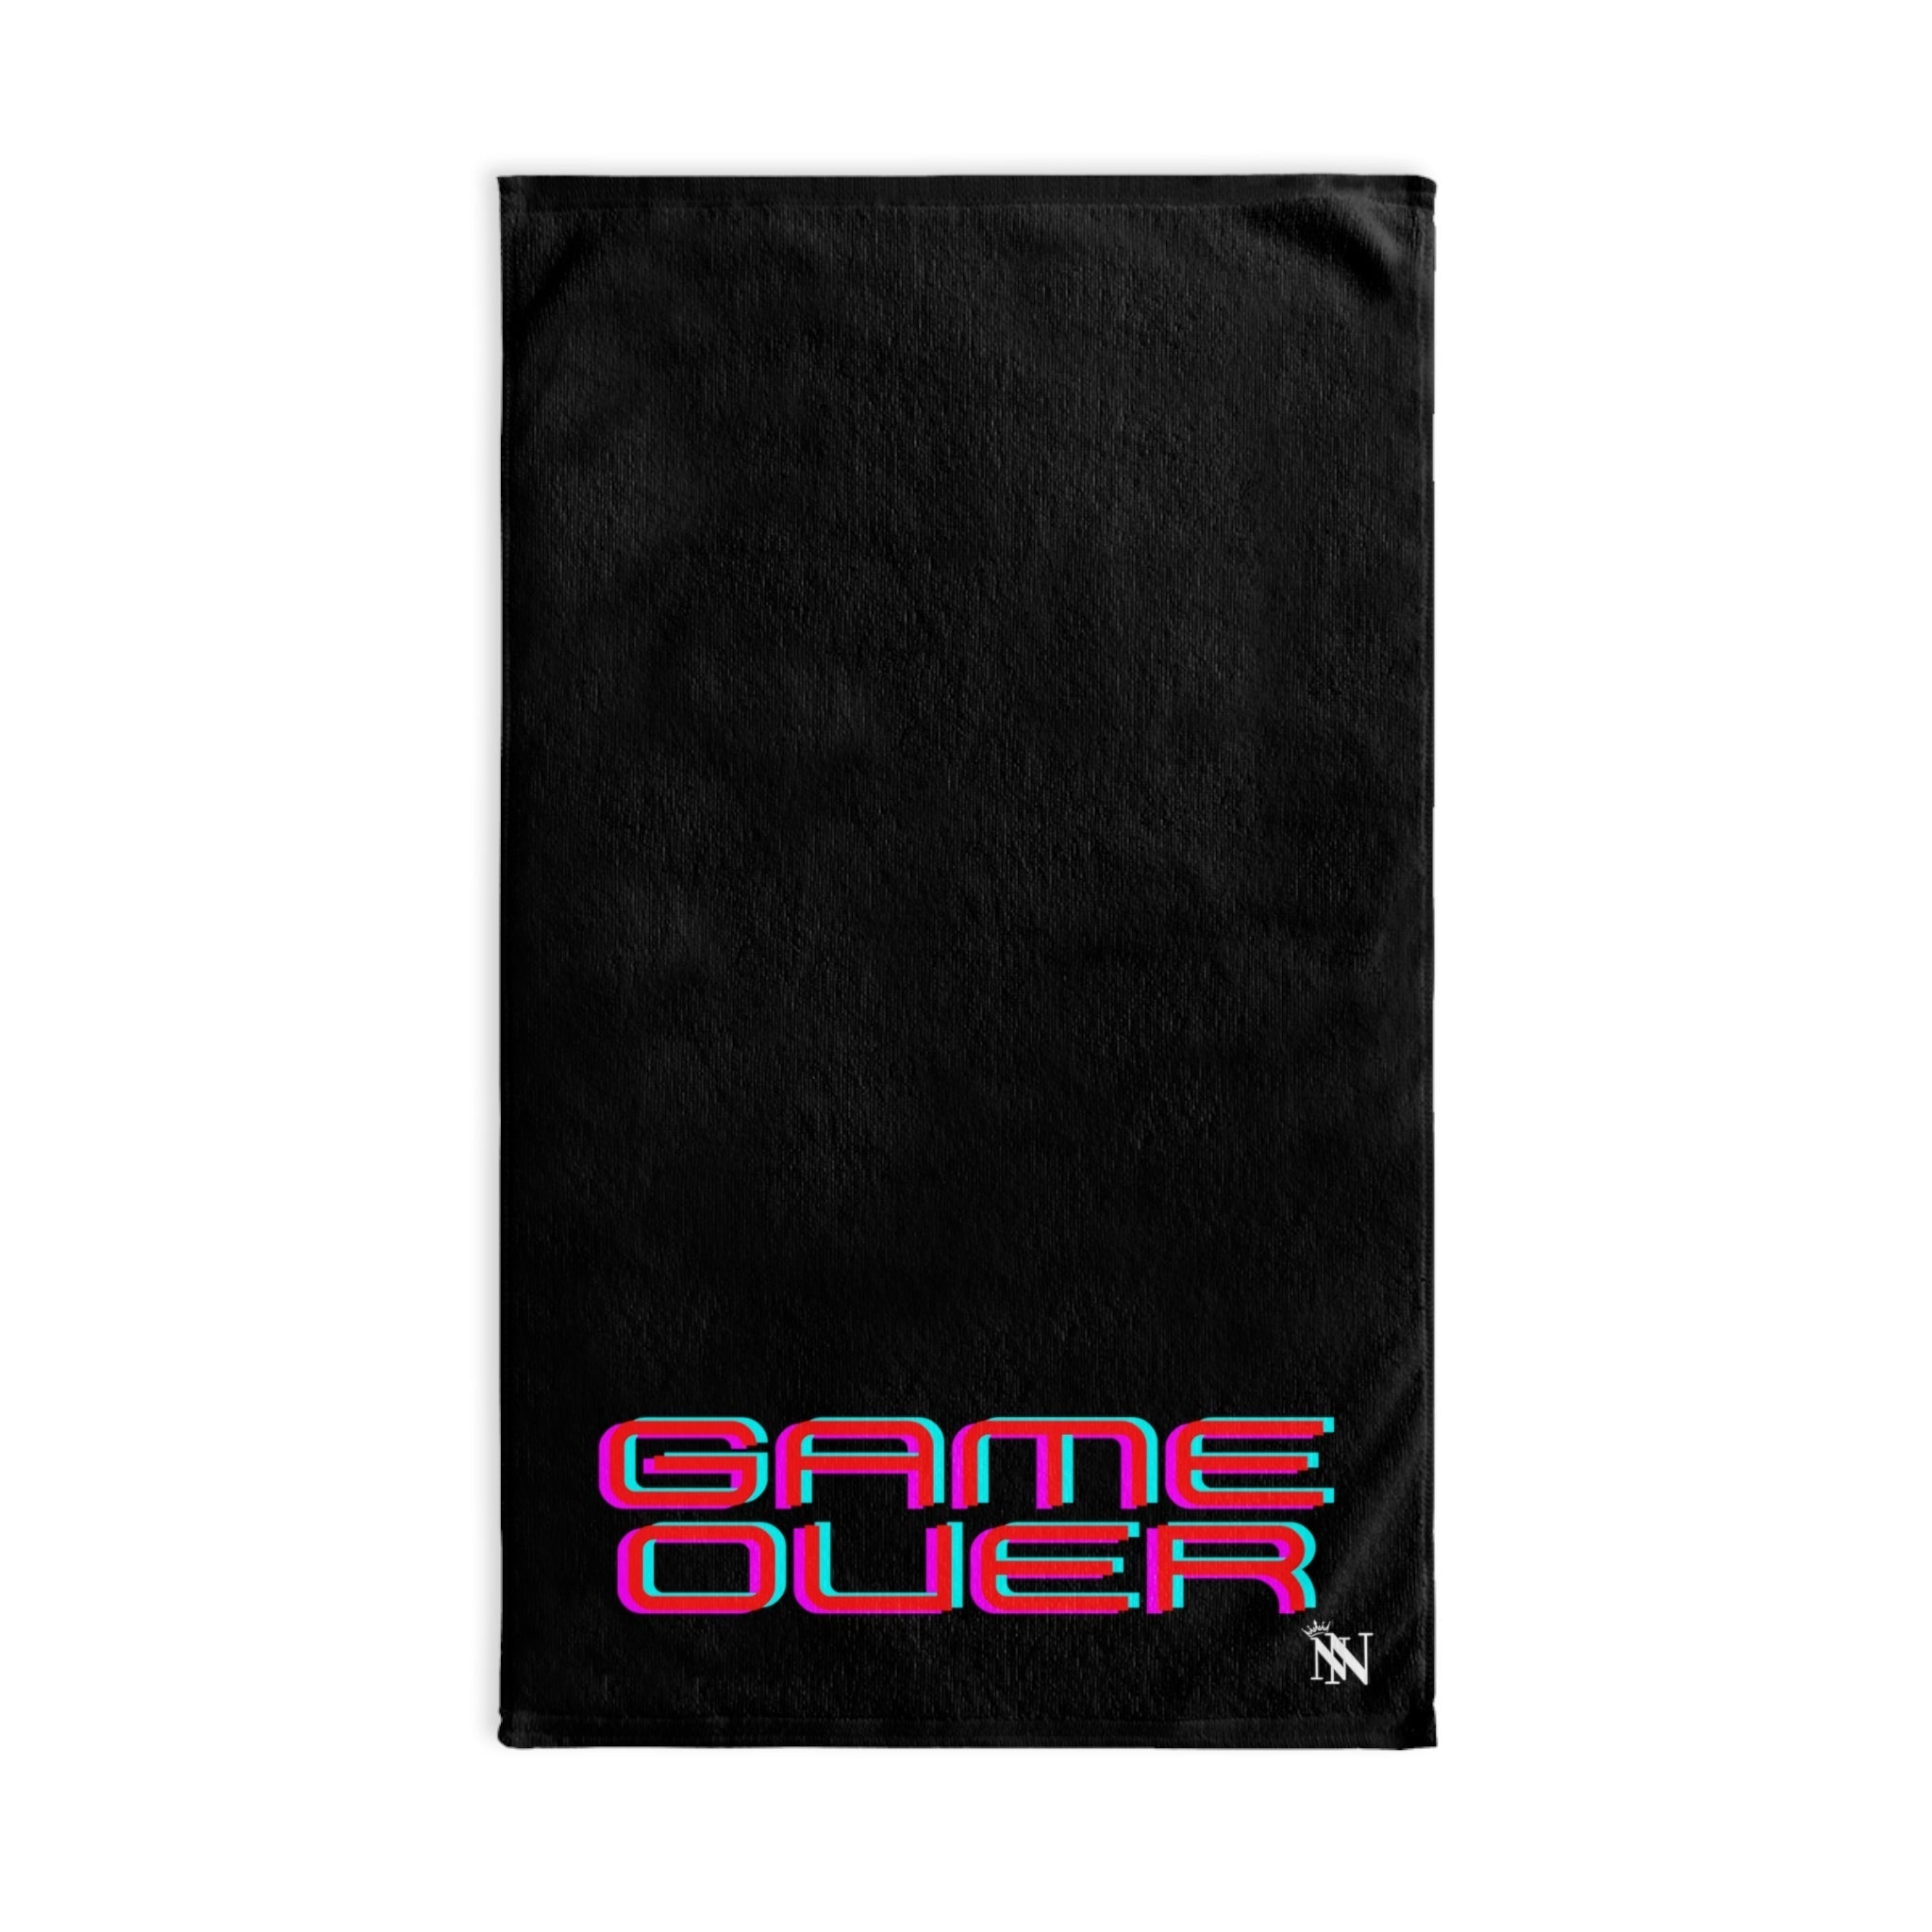 Game Over Black | Sexy Gifts for Boyfriend, Funny Towel Romantic Gift for Wedding Couple Fiance First Year 2nd Anniversary Valentines, Party Gag Gifts, Joke Humor Cloth for Husband Men BF NECTAR NAPKINS